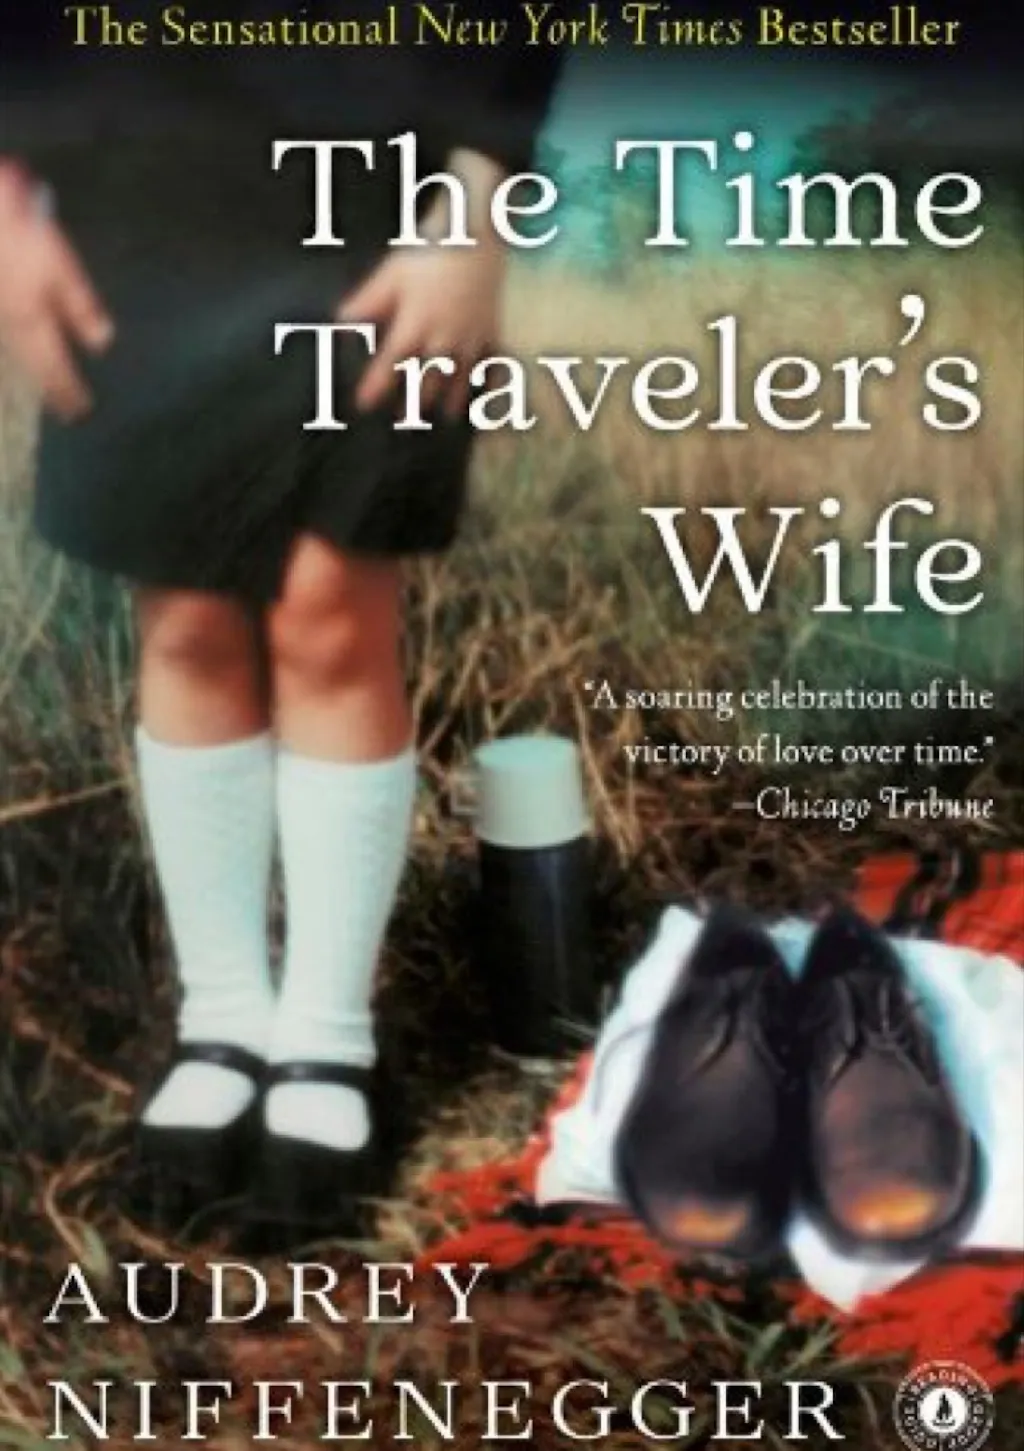 the time traveler's wife books every woman should read in her 40s